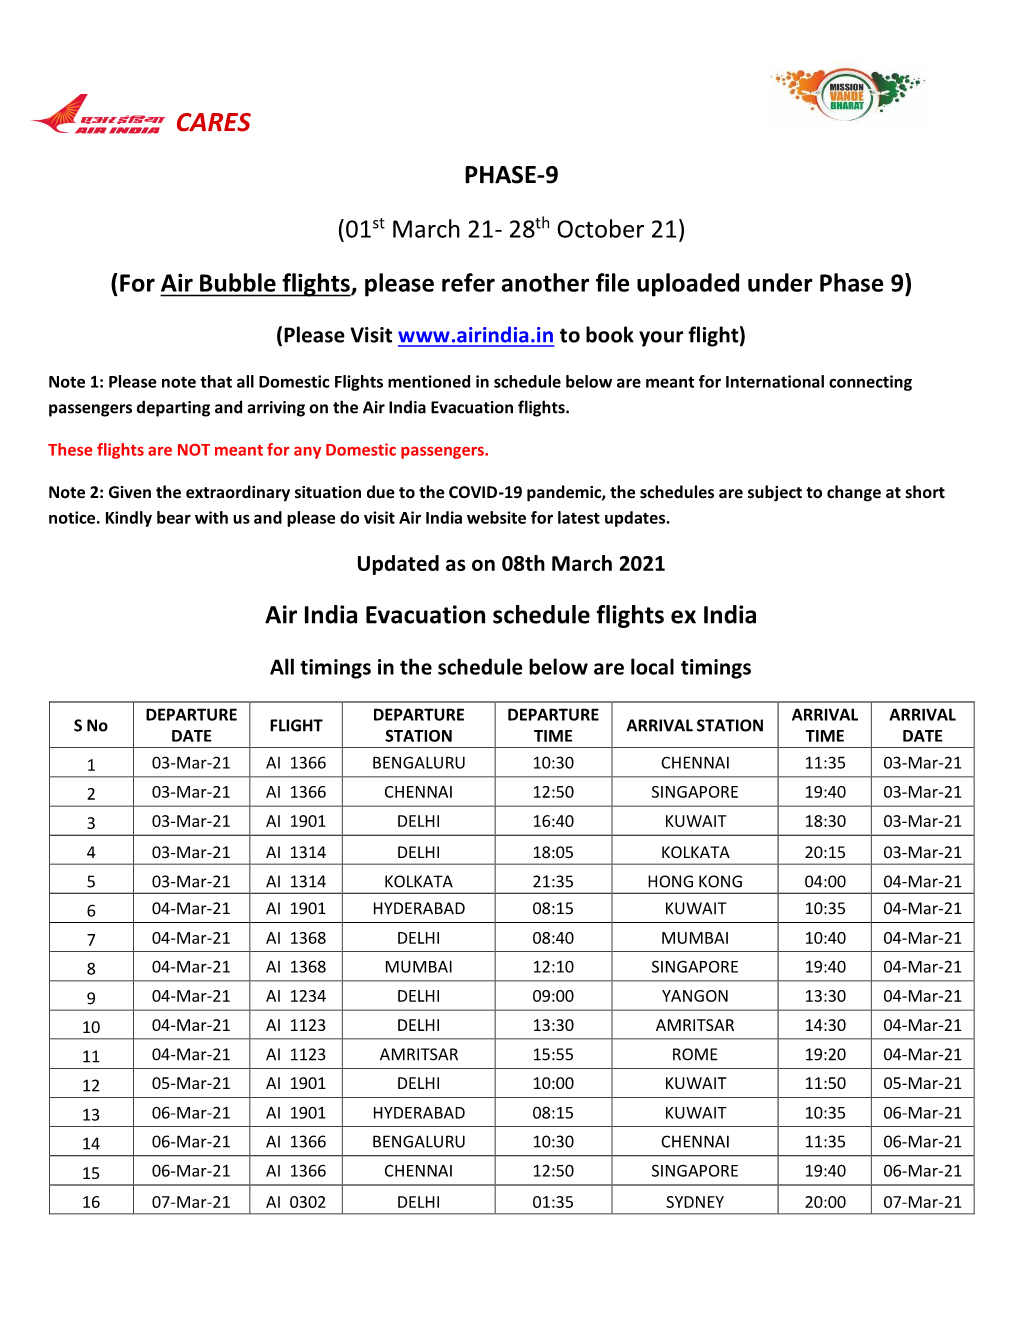 PHASE-9 (01St March 21- 28Th October 21) (For Air Bubble Flights